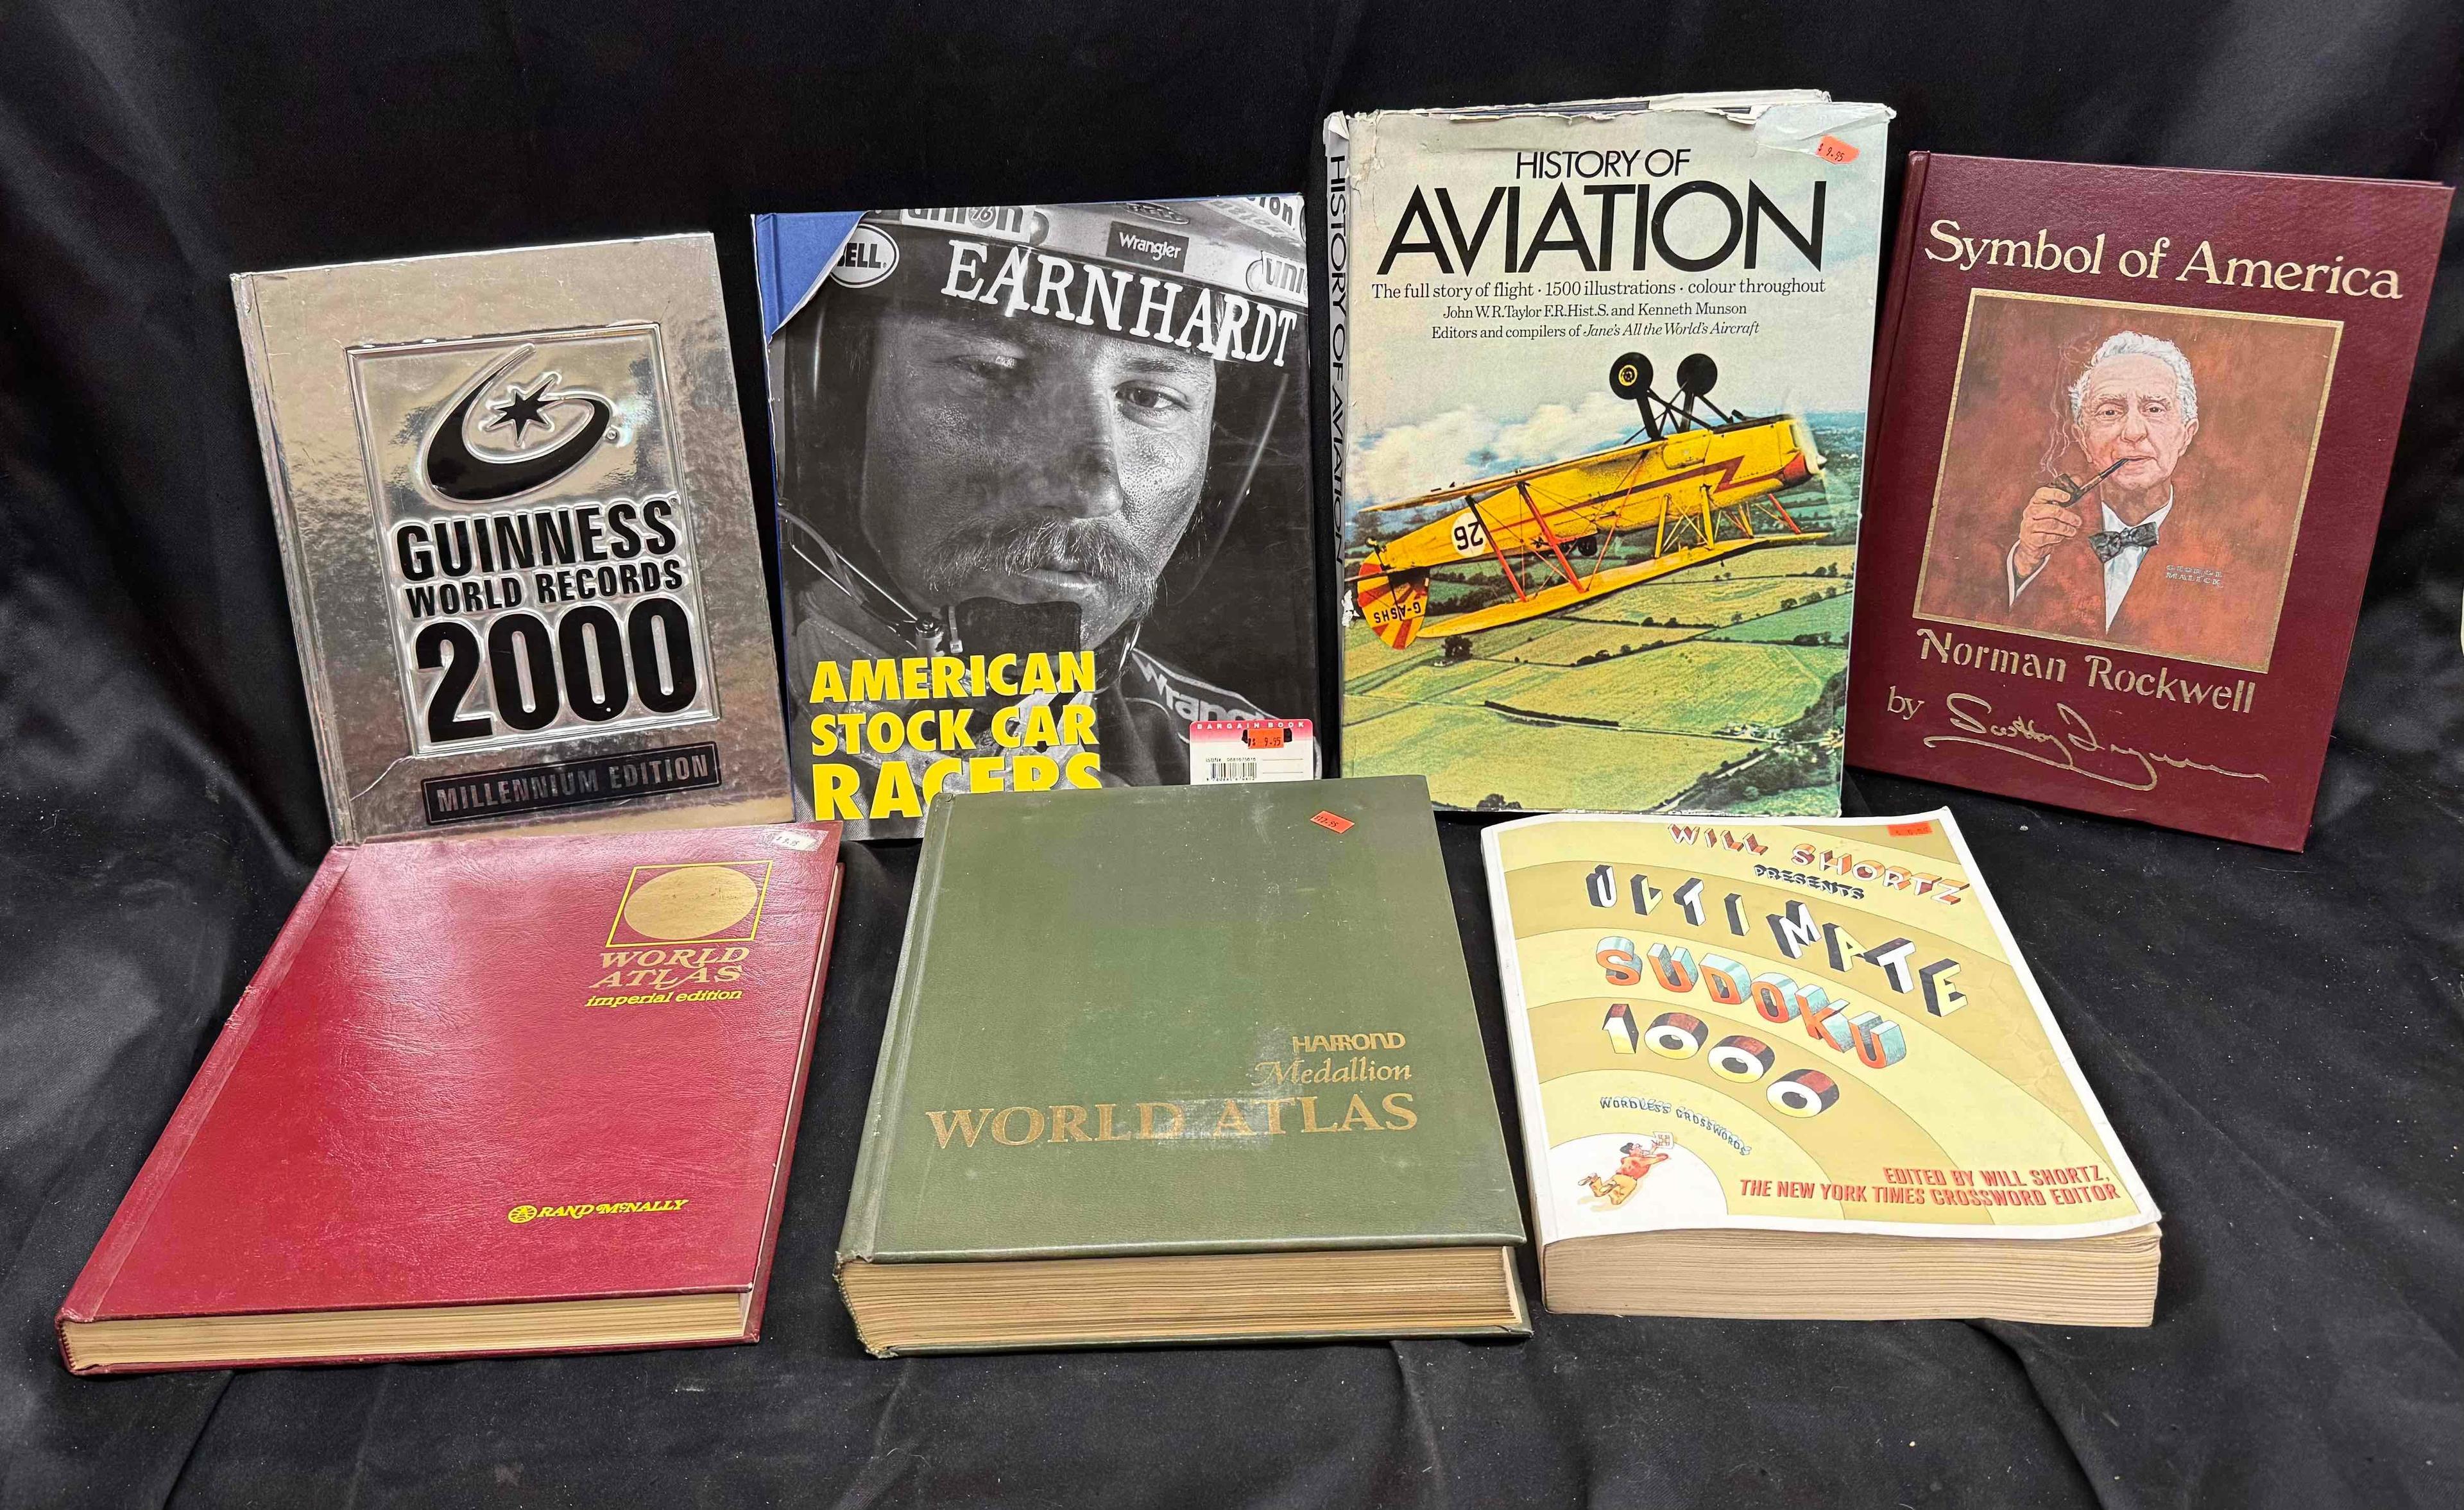 Large Books Norman Rockwell, Earnhardt, History of Aviation, Guinness more